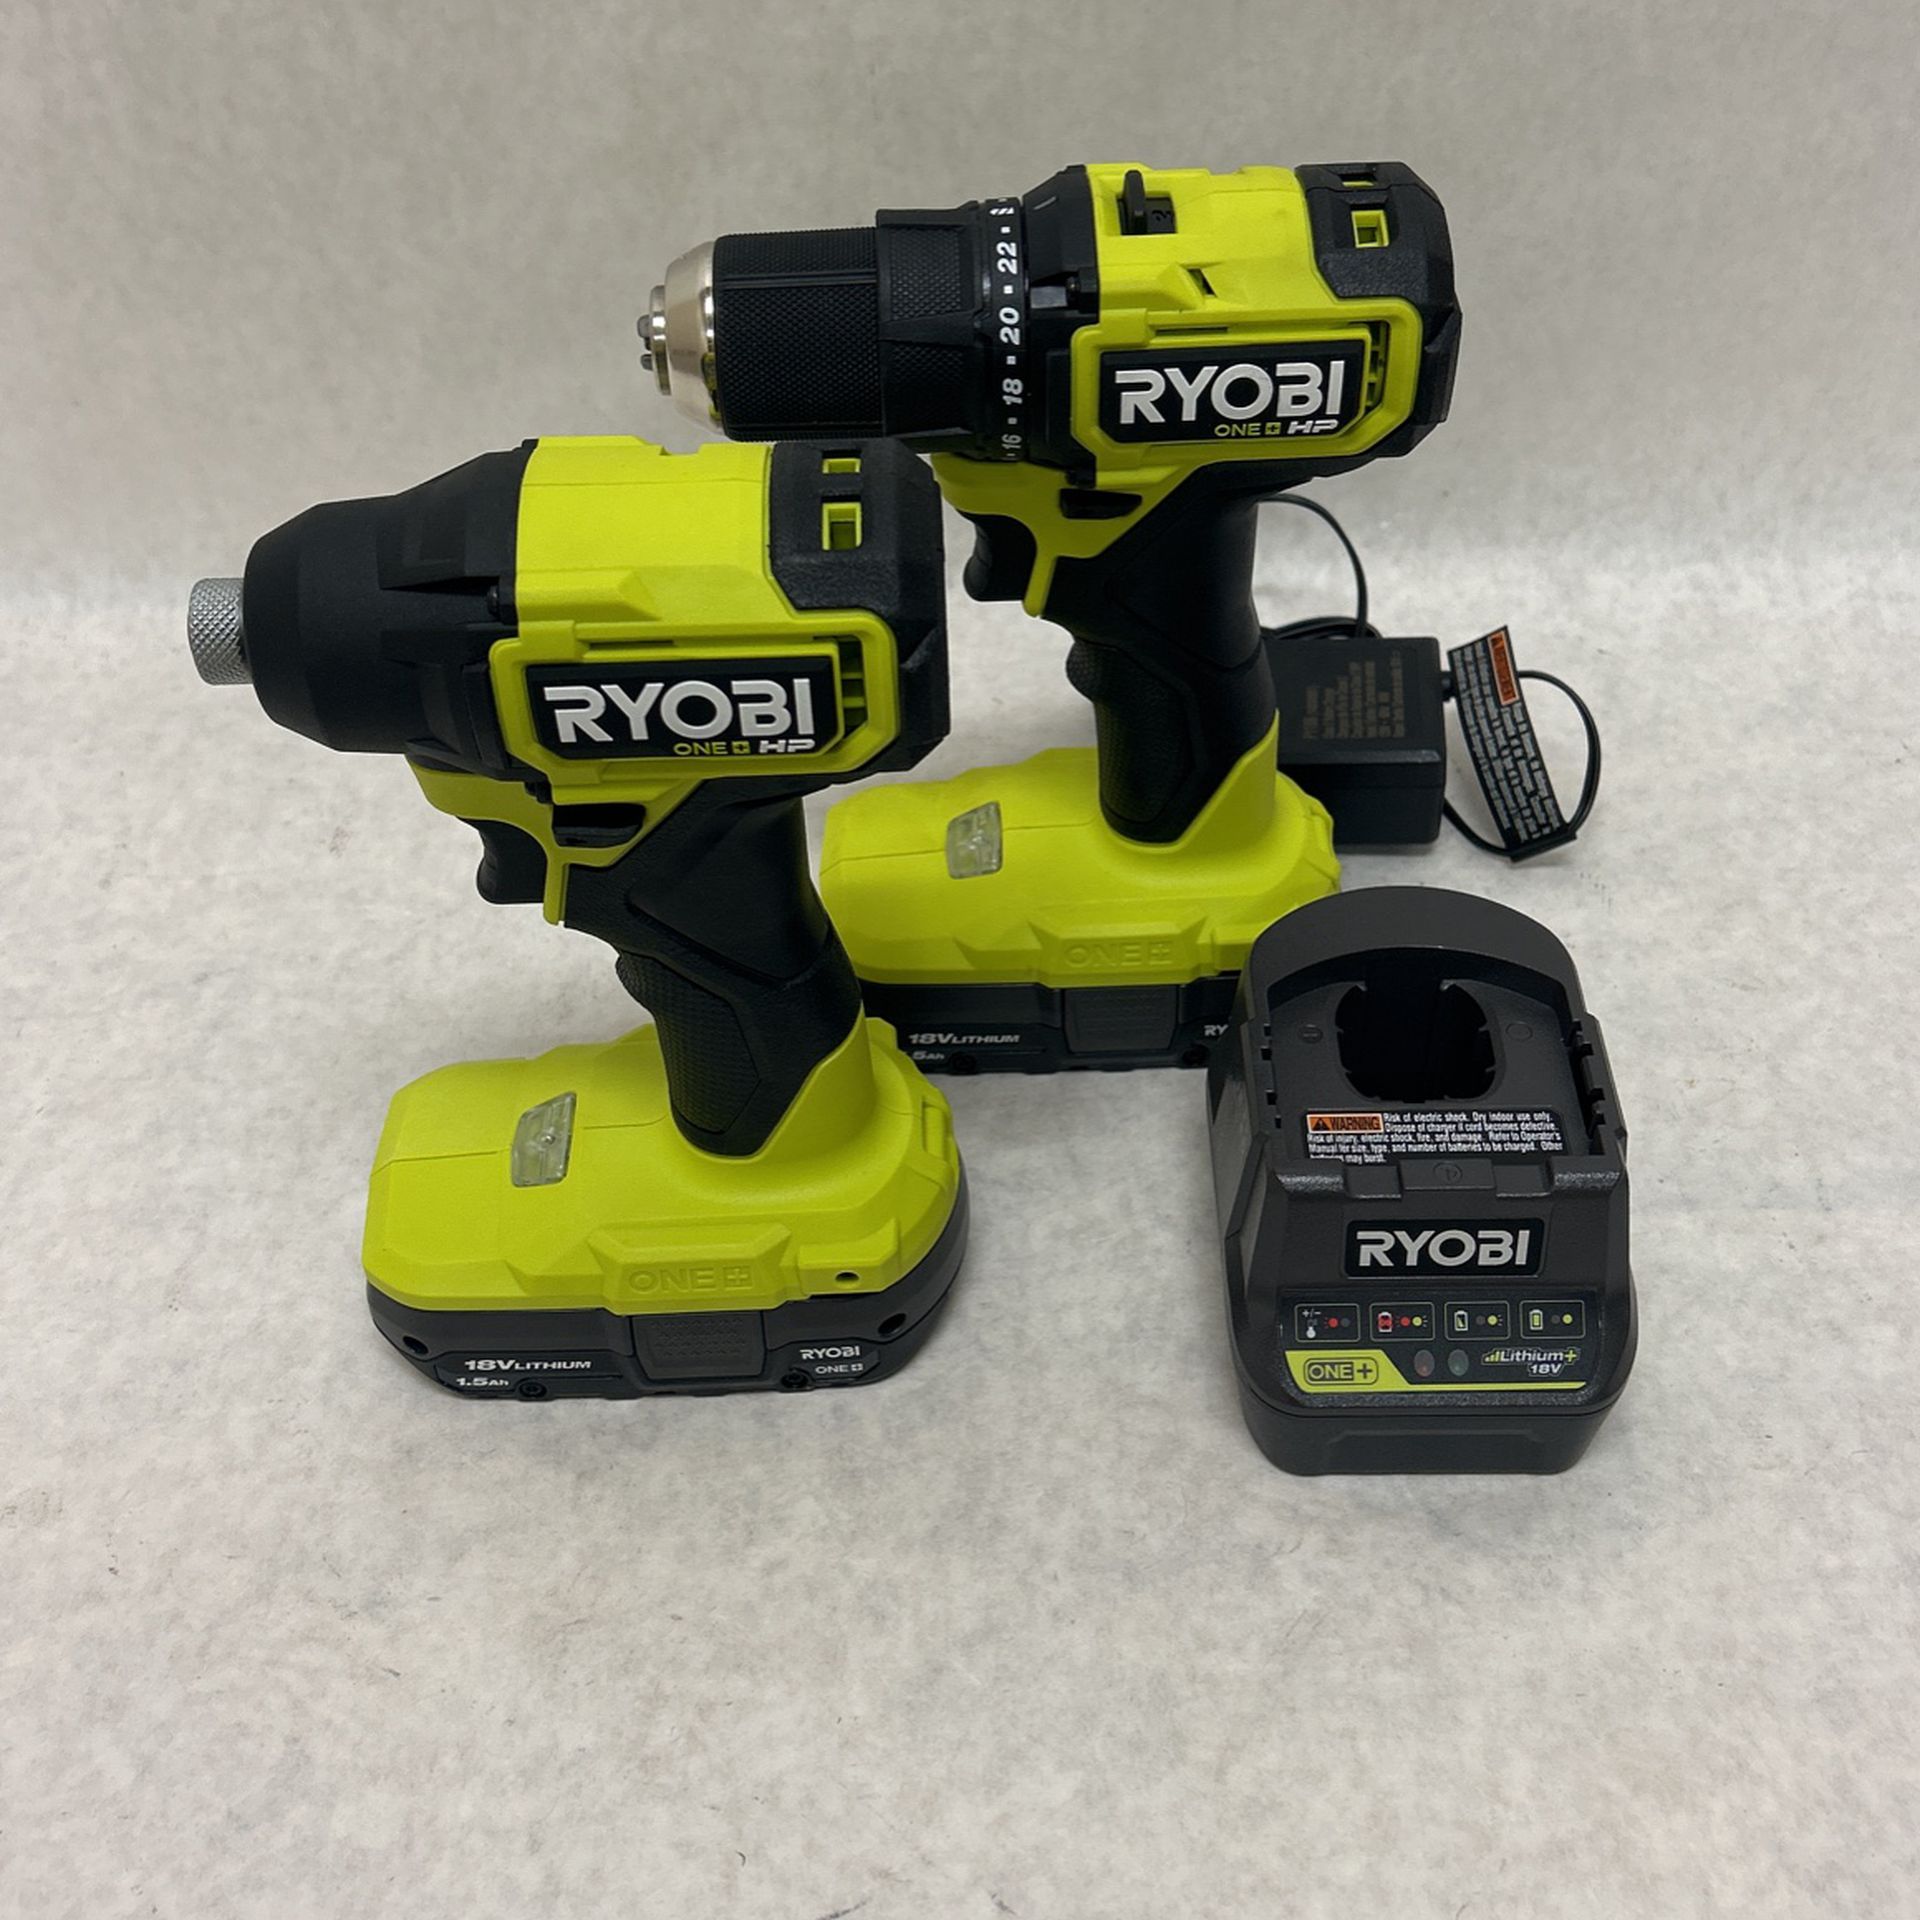 Ryobi 1+ drill and impact set two batteries charger new